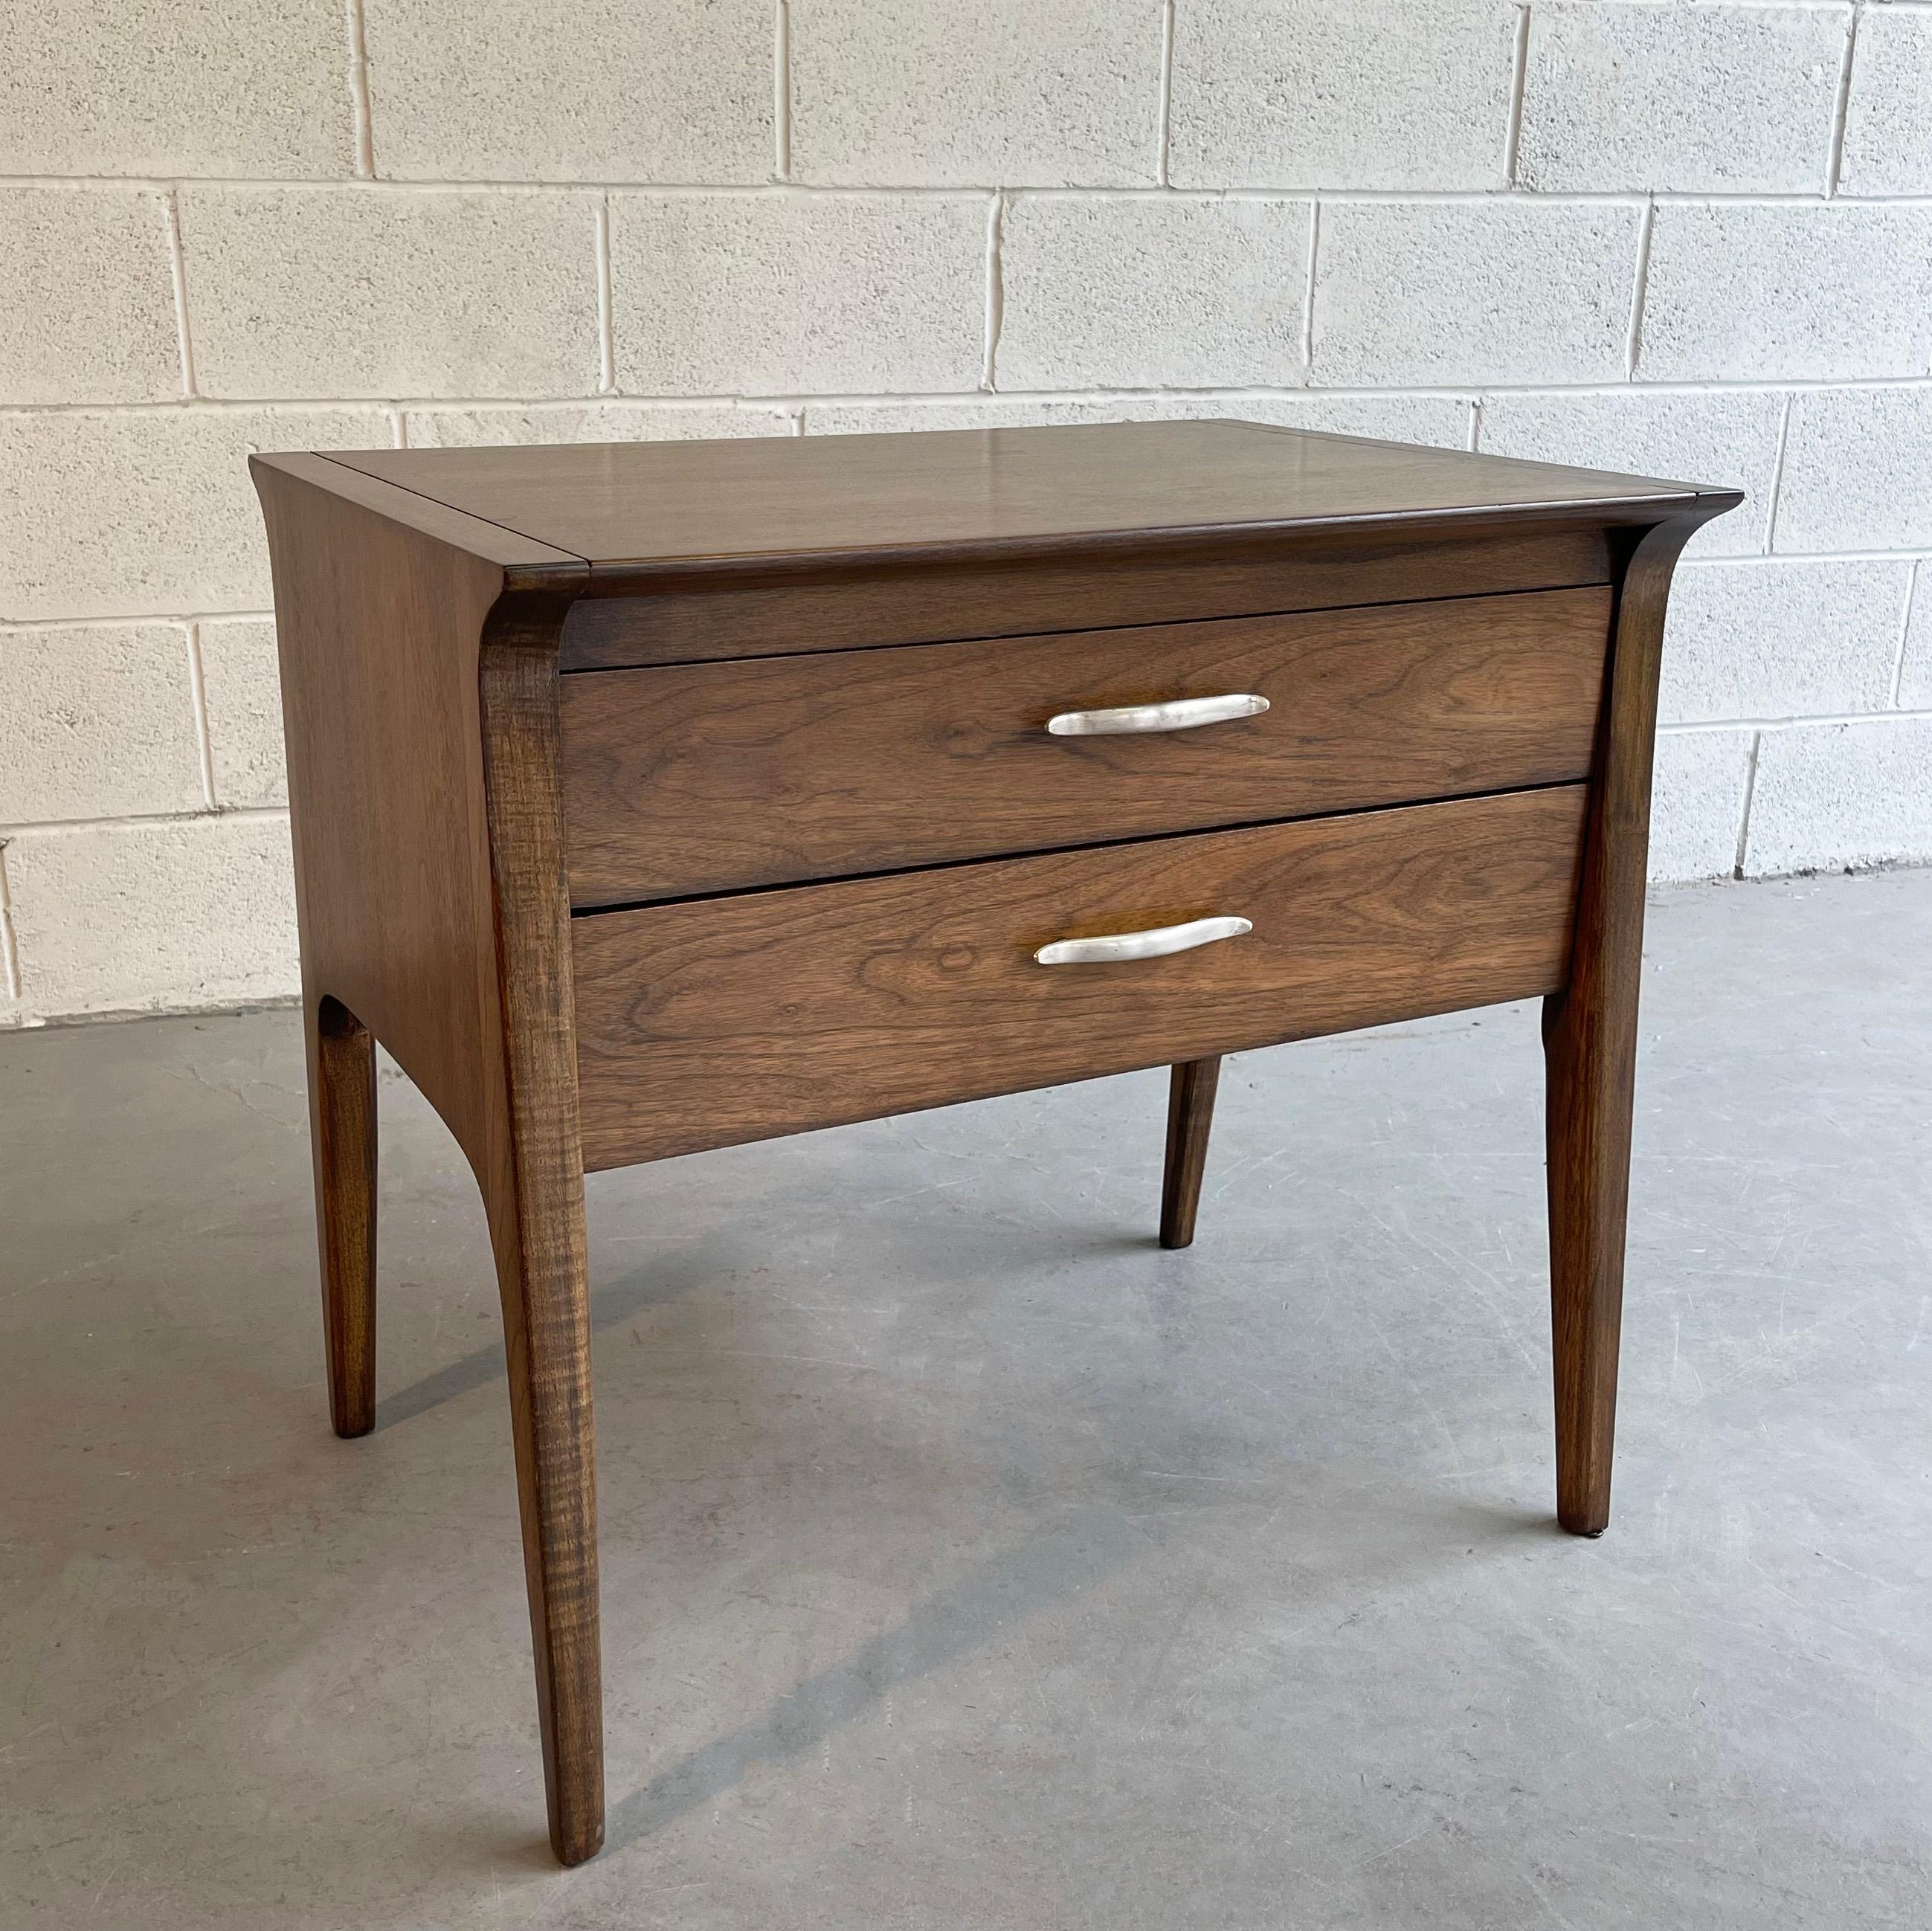 Petite, ash, sideboard or cabinet by John Van Koert for Drexel with fantastic lines features 2 drawers at 2.5 and 3.5 inches height with curved, anodized aluminum handles. Height to the drawers is 15.5 inches.